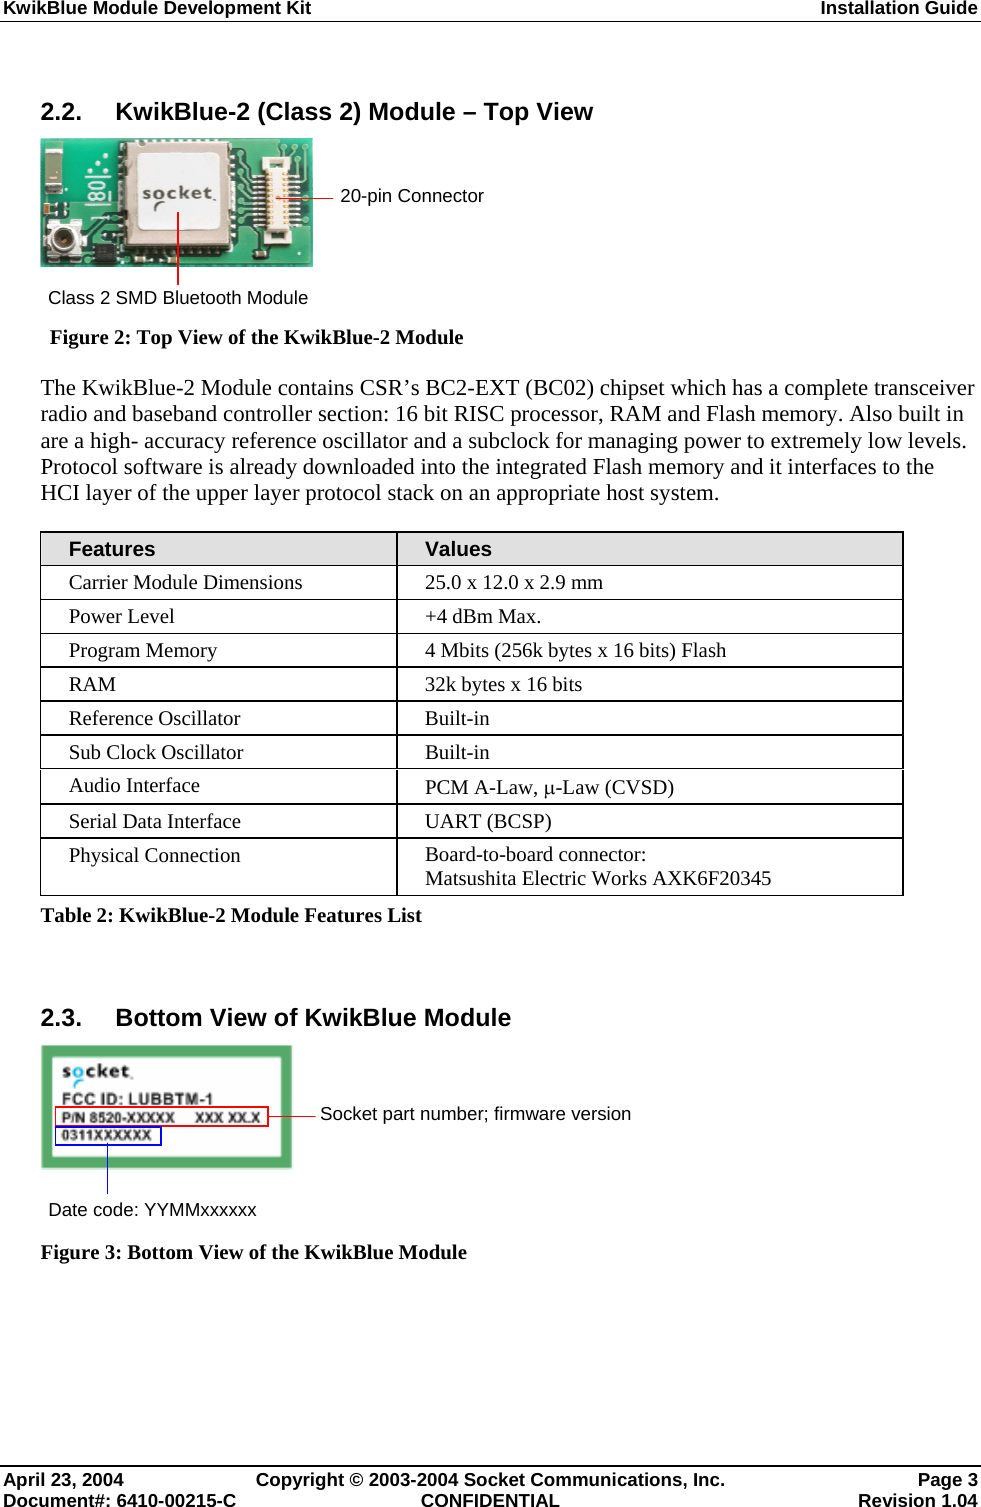 KwikBlue Module Development Kit  Installation Guide  2.2. KwikBlue-2 (Class 2) Module – Top View    Figure 2: Top View of the KwikBlue-2 Module The KwikBlue-2 Module contains CSR’s BC2-EXT (BC02) chipset which has a complete transceiver radio and baseband controller section: 16 bit RISC processor, RAM and Flash memory. Also built in are a high- accuracy reference oscillator and a subclock for managing power to extremely low levels. Protocol software is already downloaded into the integrated Flash memory and it interfaces to the HCI layer of the upper layer protocol stack on an appropriate host system. Features  Values Carrier Module Dimensions  25.0 x 12.0 x 2.9 mm Power Level  +4 dBm Max. Program Memory  4 Mbits (256k bytes x 16 bits) Flash RAM  32k bytes x 16 bits Reference Oscillator  Built-in Sub Clock Oscillator  Built-in Audio Interface  PCM A-Law, µ-Law (CVSD) Serial Data Interface  UART (BCSP) Physical Connection  Board-to-board connector: Matsushita Electric Works AXK6F20345 Table 2: KwikBlue-2 Module Features List  2.3.  Bottom View of KwikBlue Module    Figure 3: Bottom View of the KwikBlue Module  Socket part number; firmware version 20-pin Connector Class 2 SMD Bluetooth Module Date code: YYMMxxxxxx April 23, 2004  Copyright © 2003-2004 Socket Communications, Inc.  Page 3 Document#: 6410-00215-C  CONFIDENTIAL  Revision 1.04 